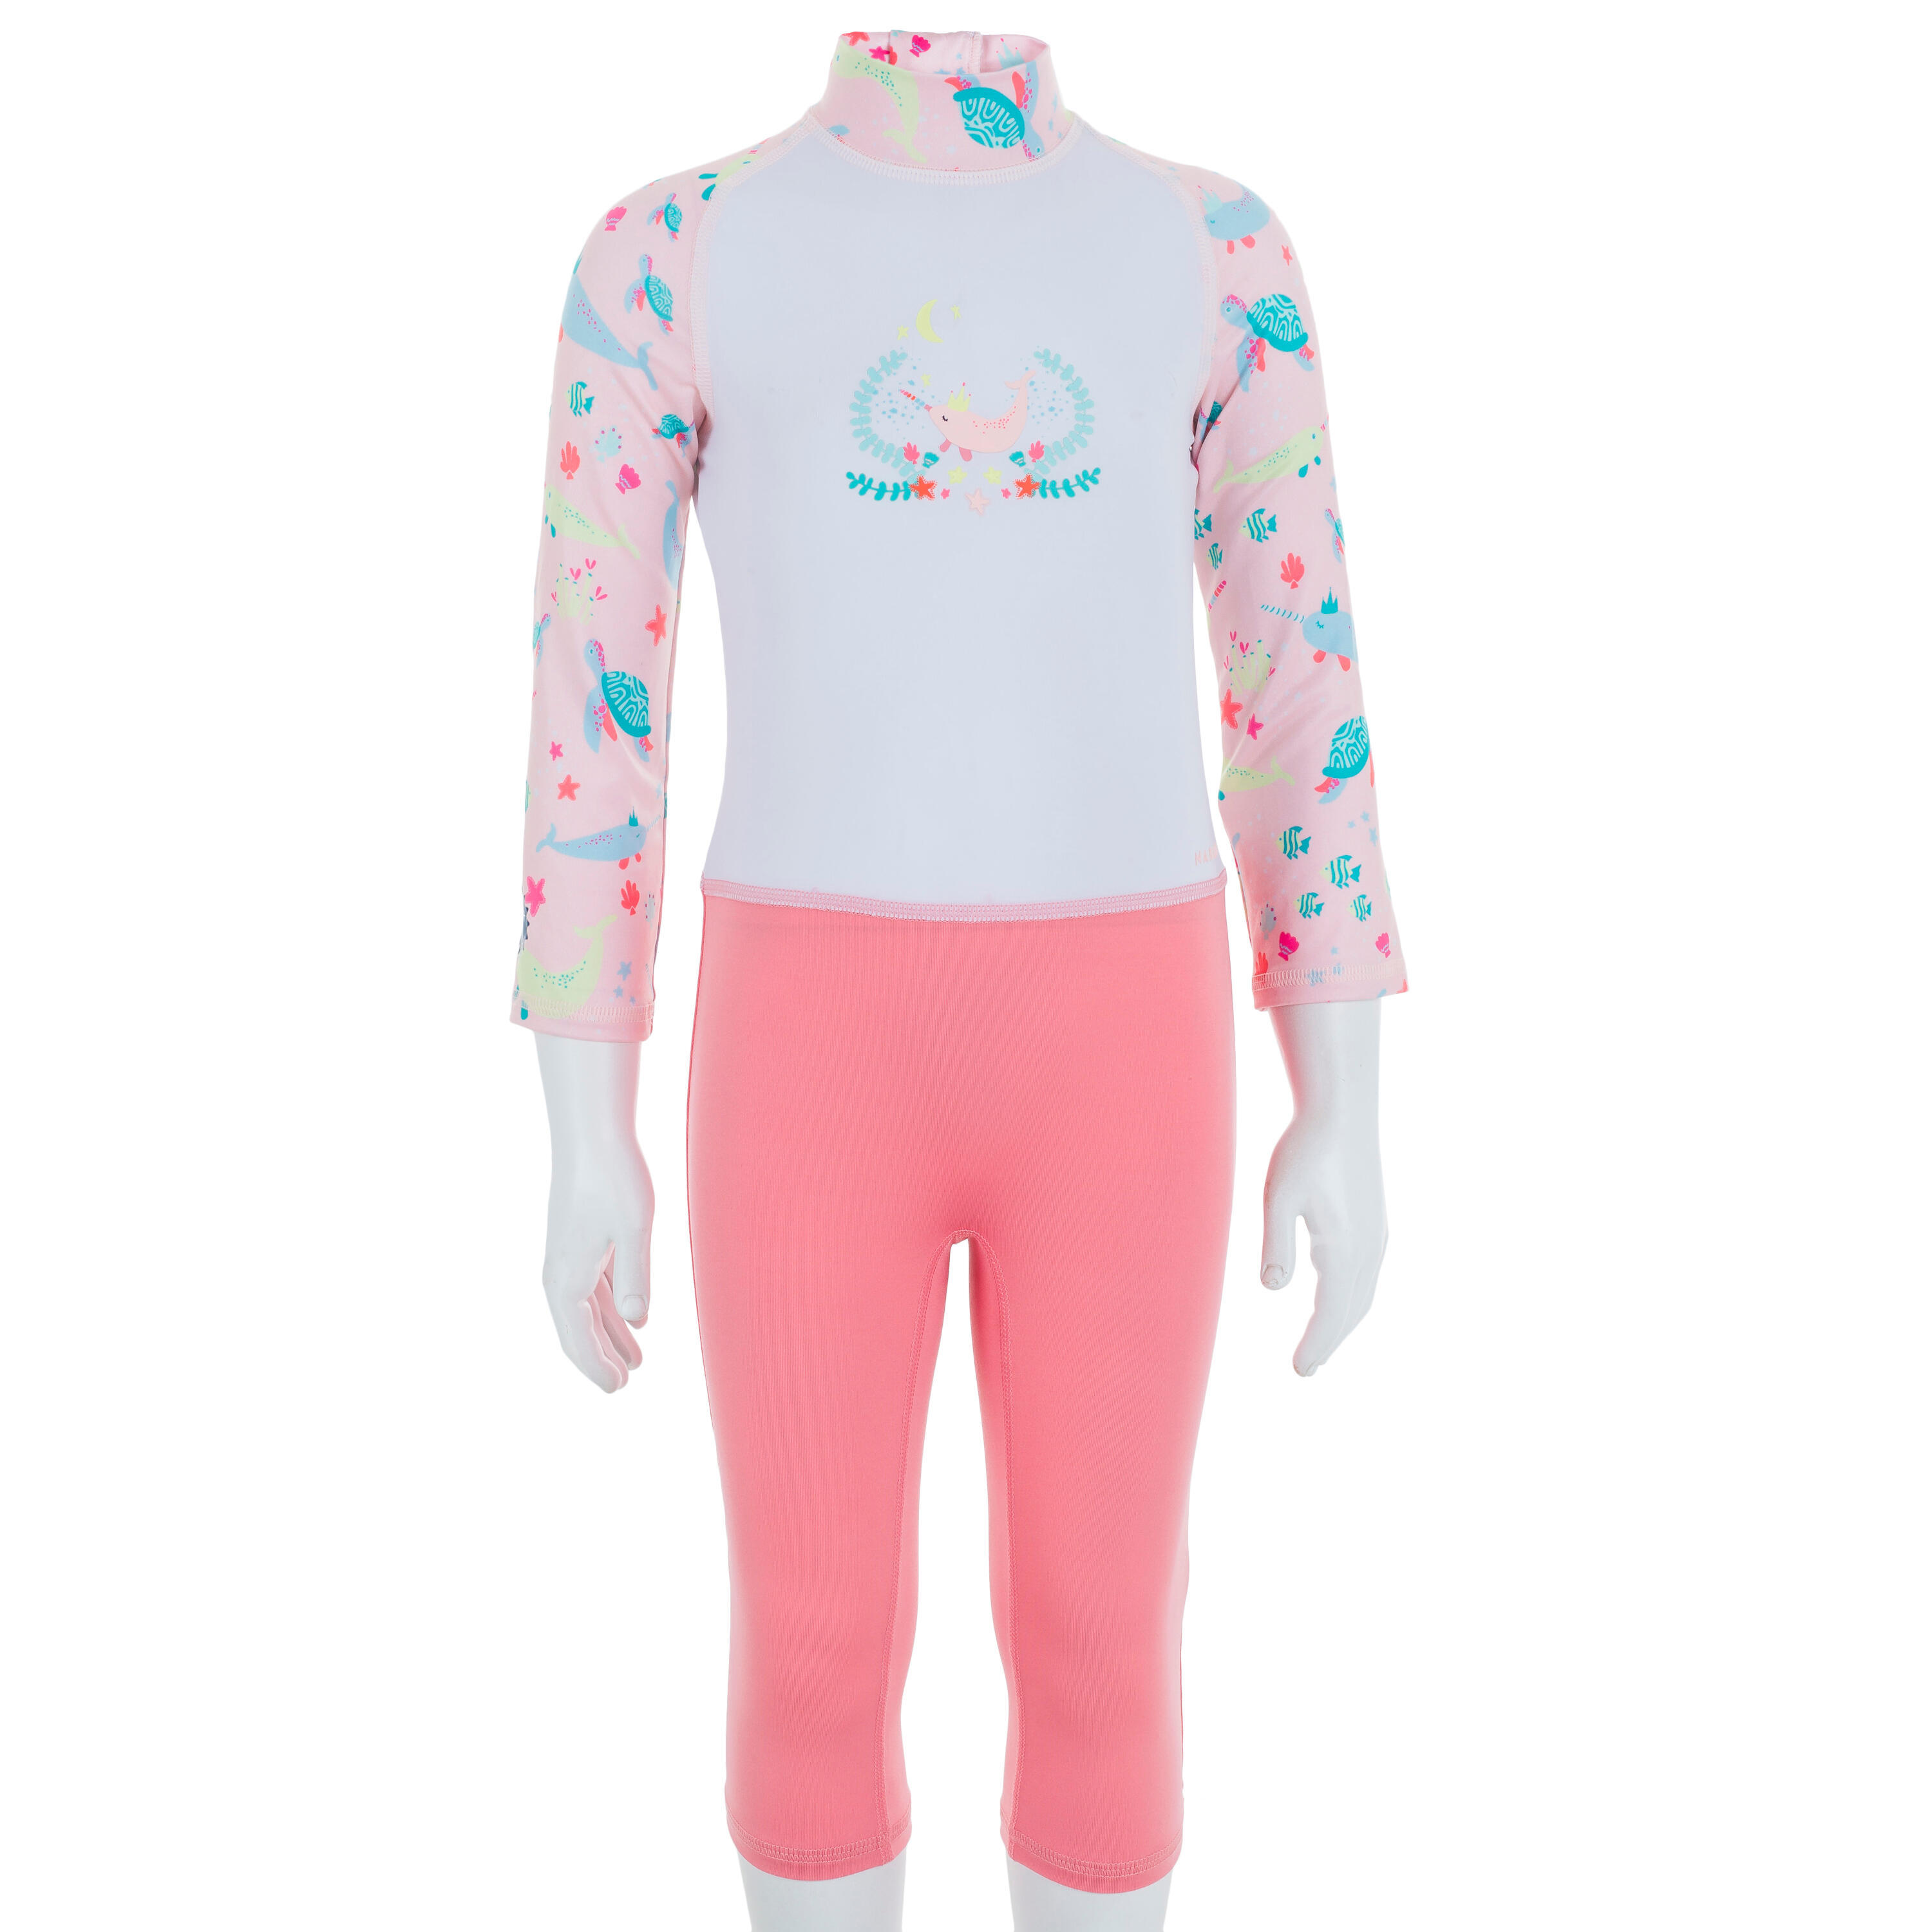 Baby / Kids' Swimming Long Sleeve UV-Protection Suit - Pink Print 3/8